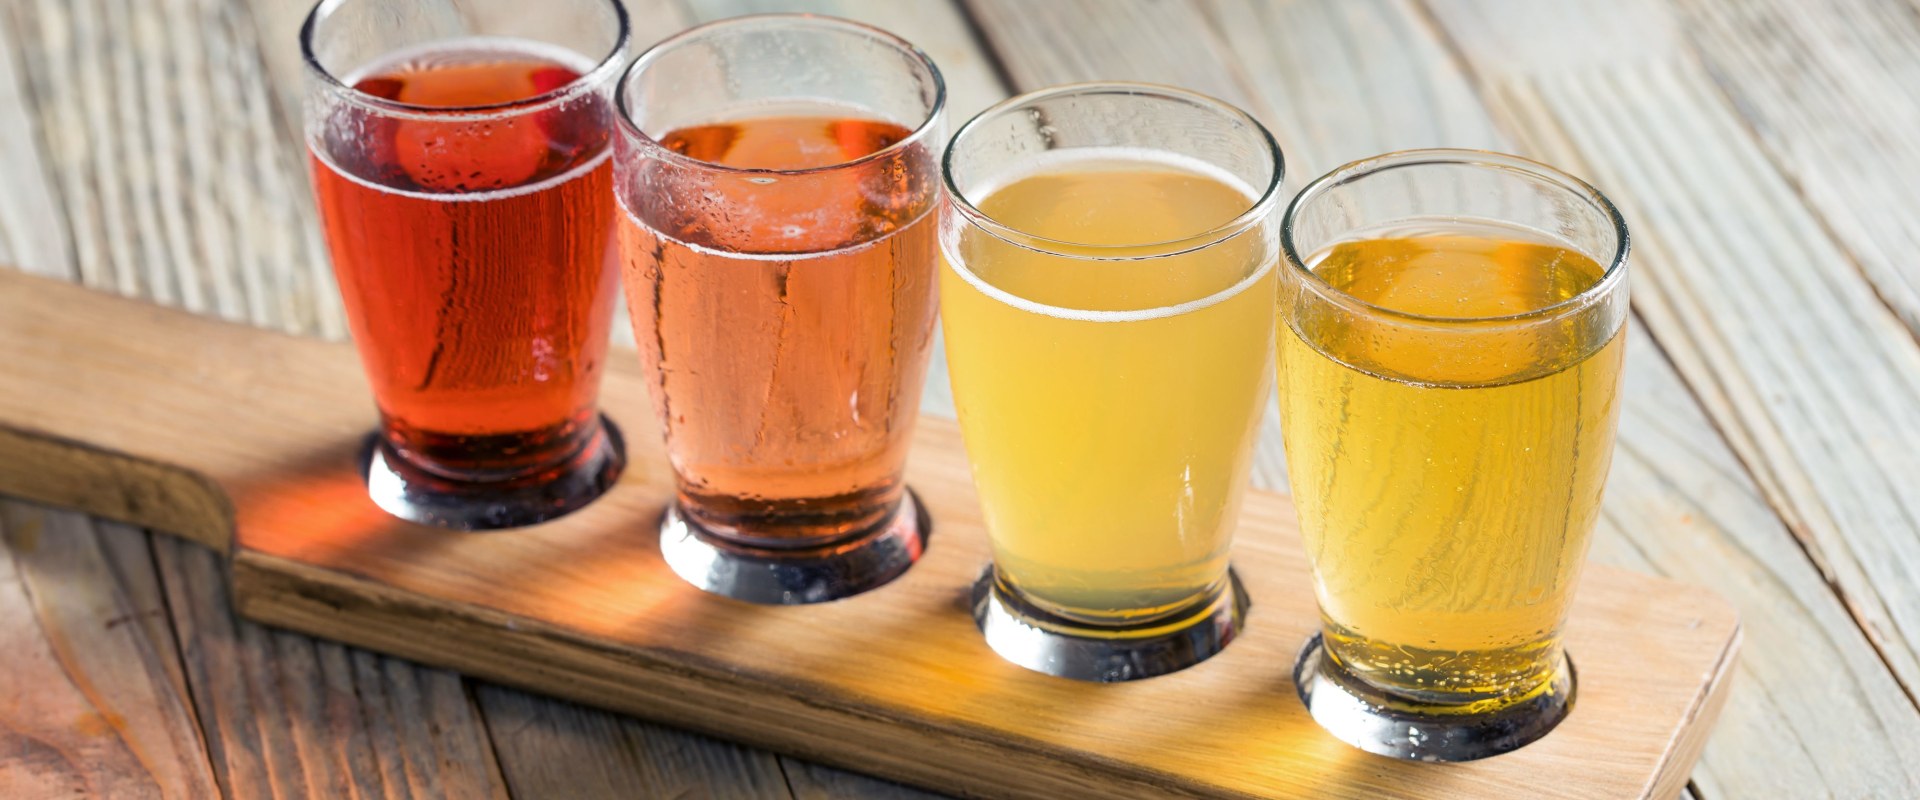 Are ciders healthier than wine?